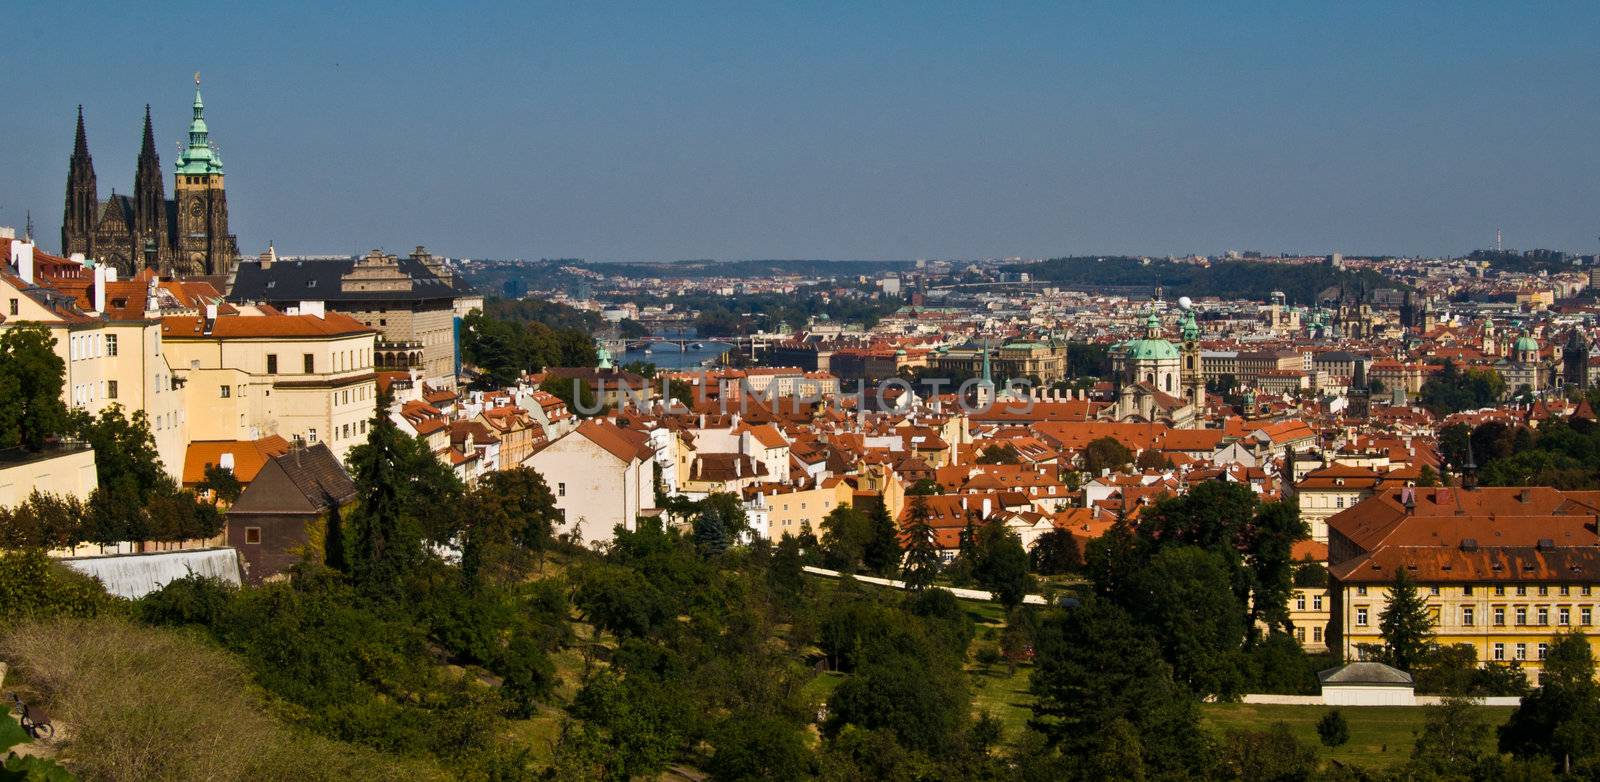 view of the old castle of Prague above the town